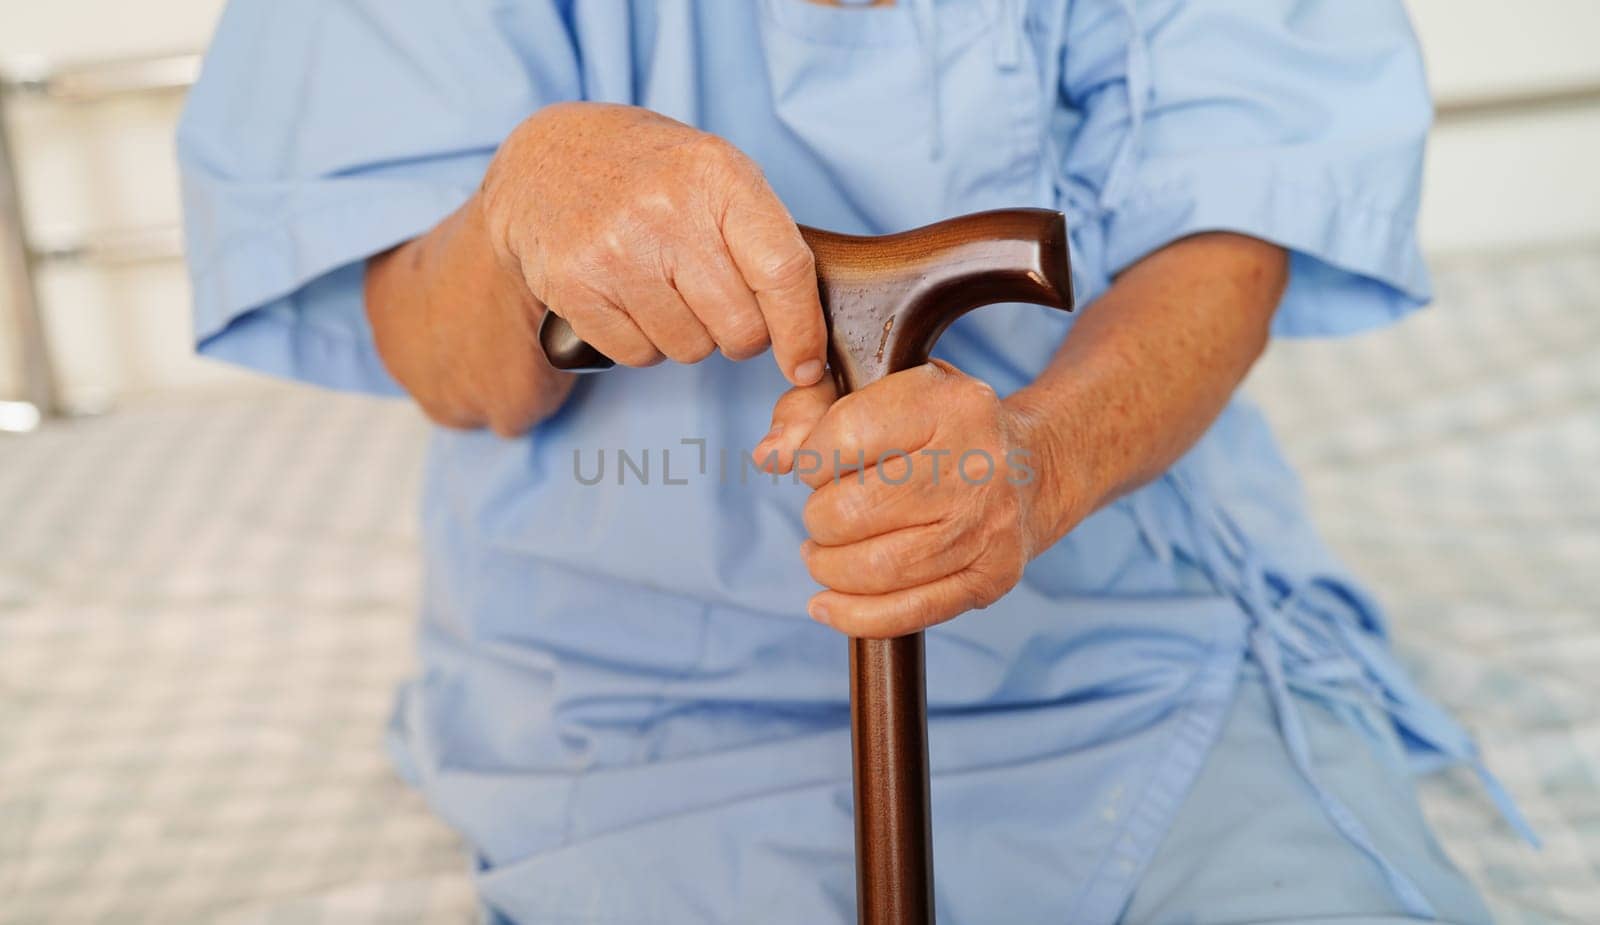 Asian elderly disability woman patient holding walking stick in wrinkled hand at hospital.